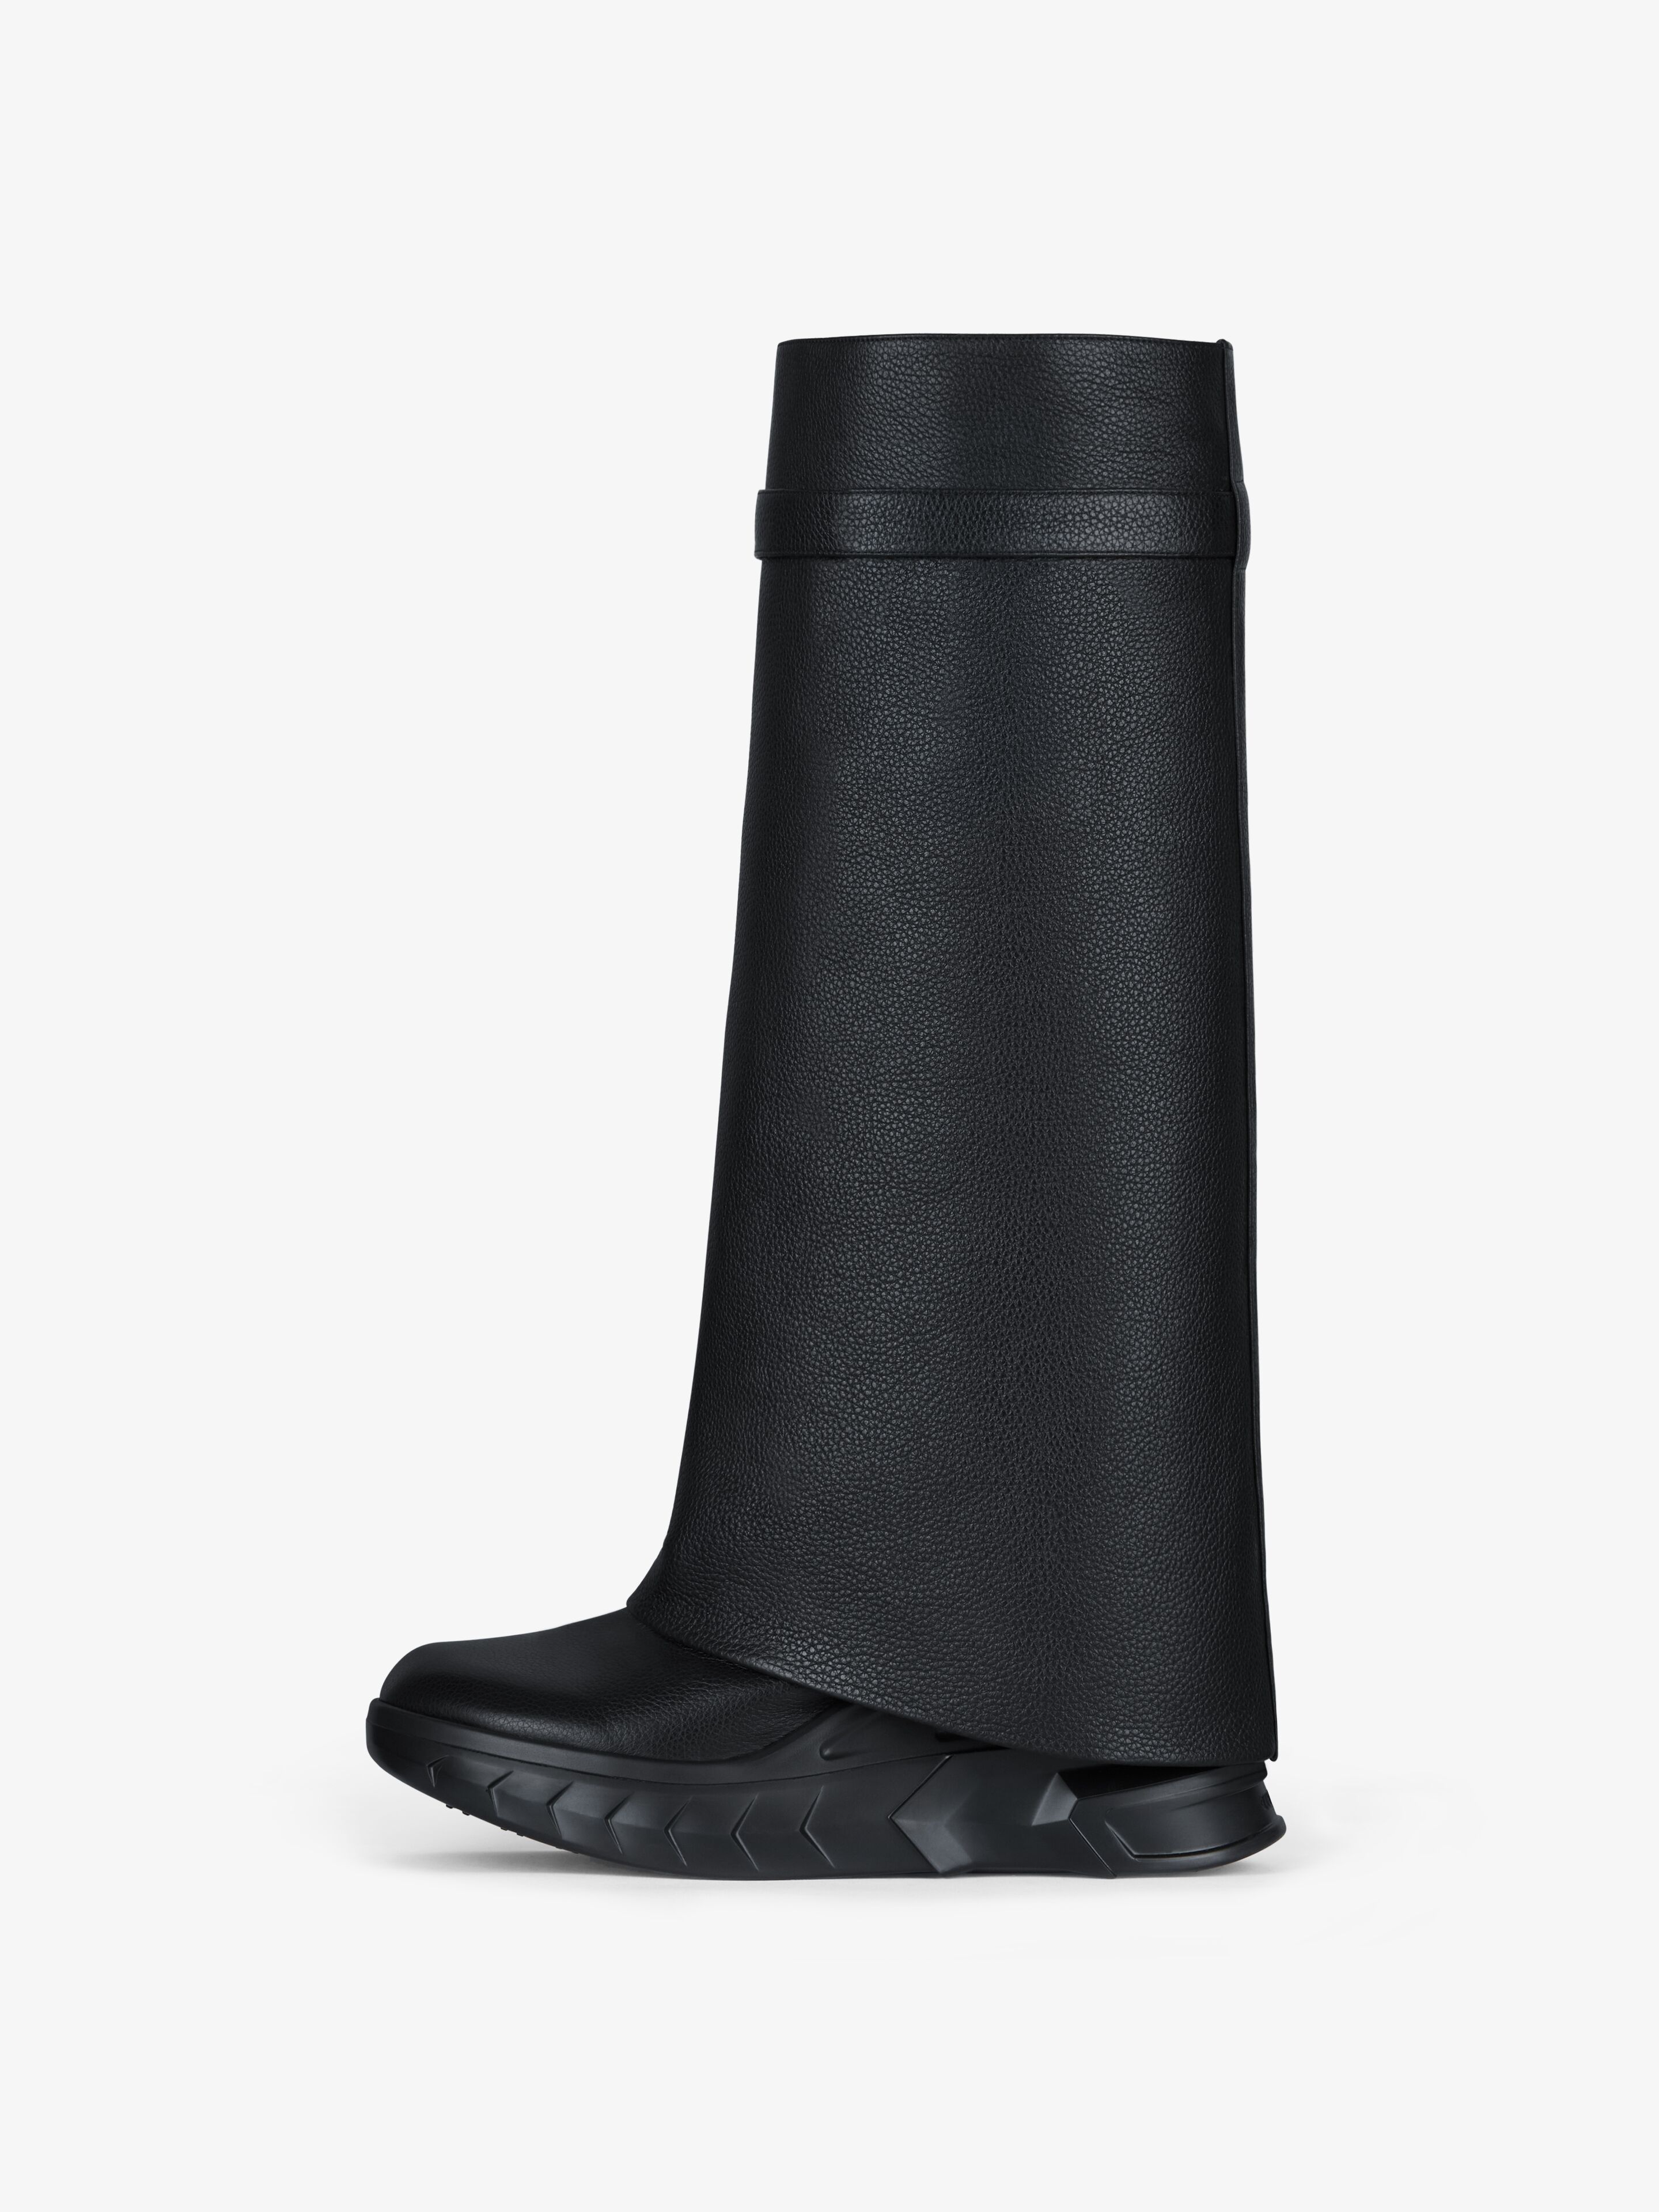 Shark Lock Leather Ankle Boots in Black - Givenchy